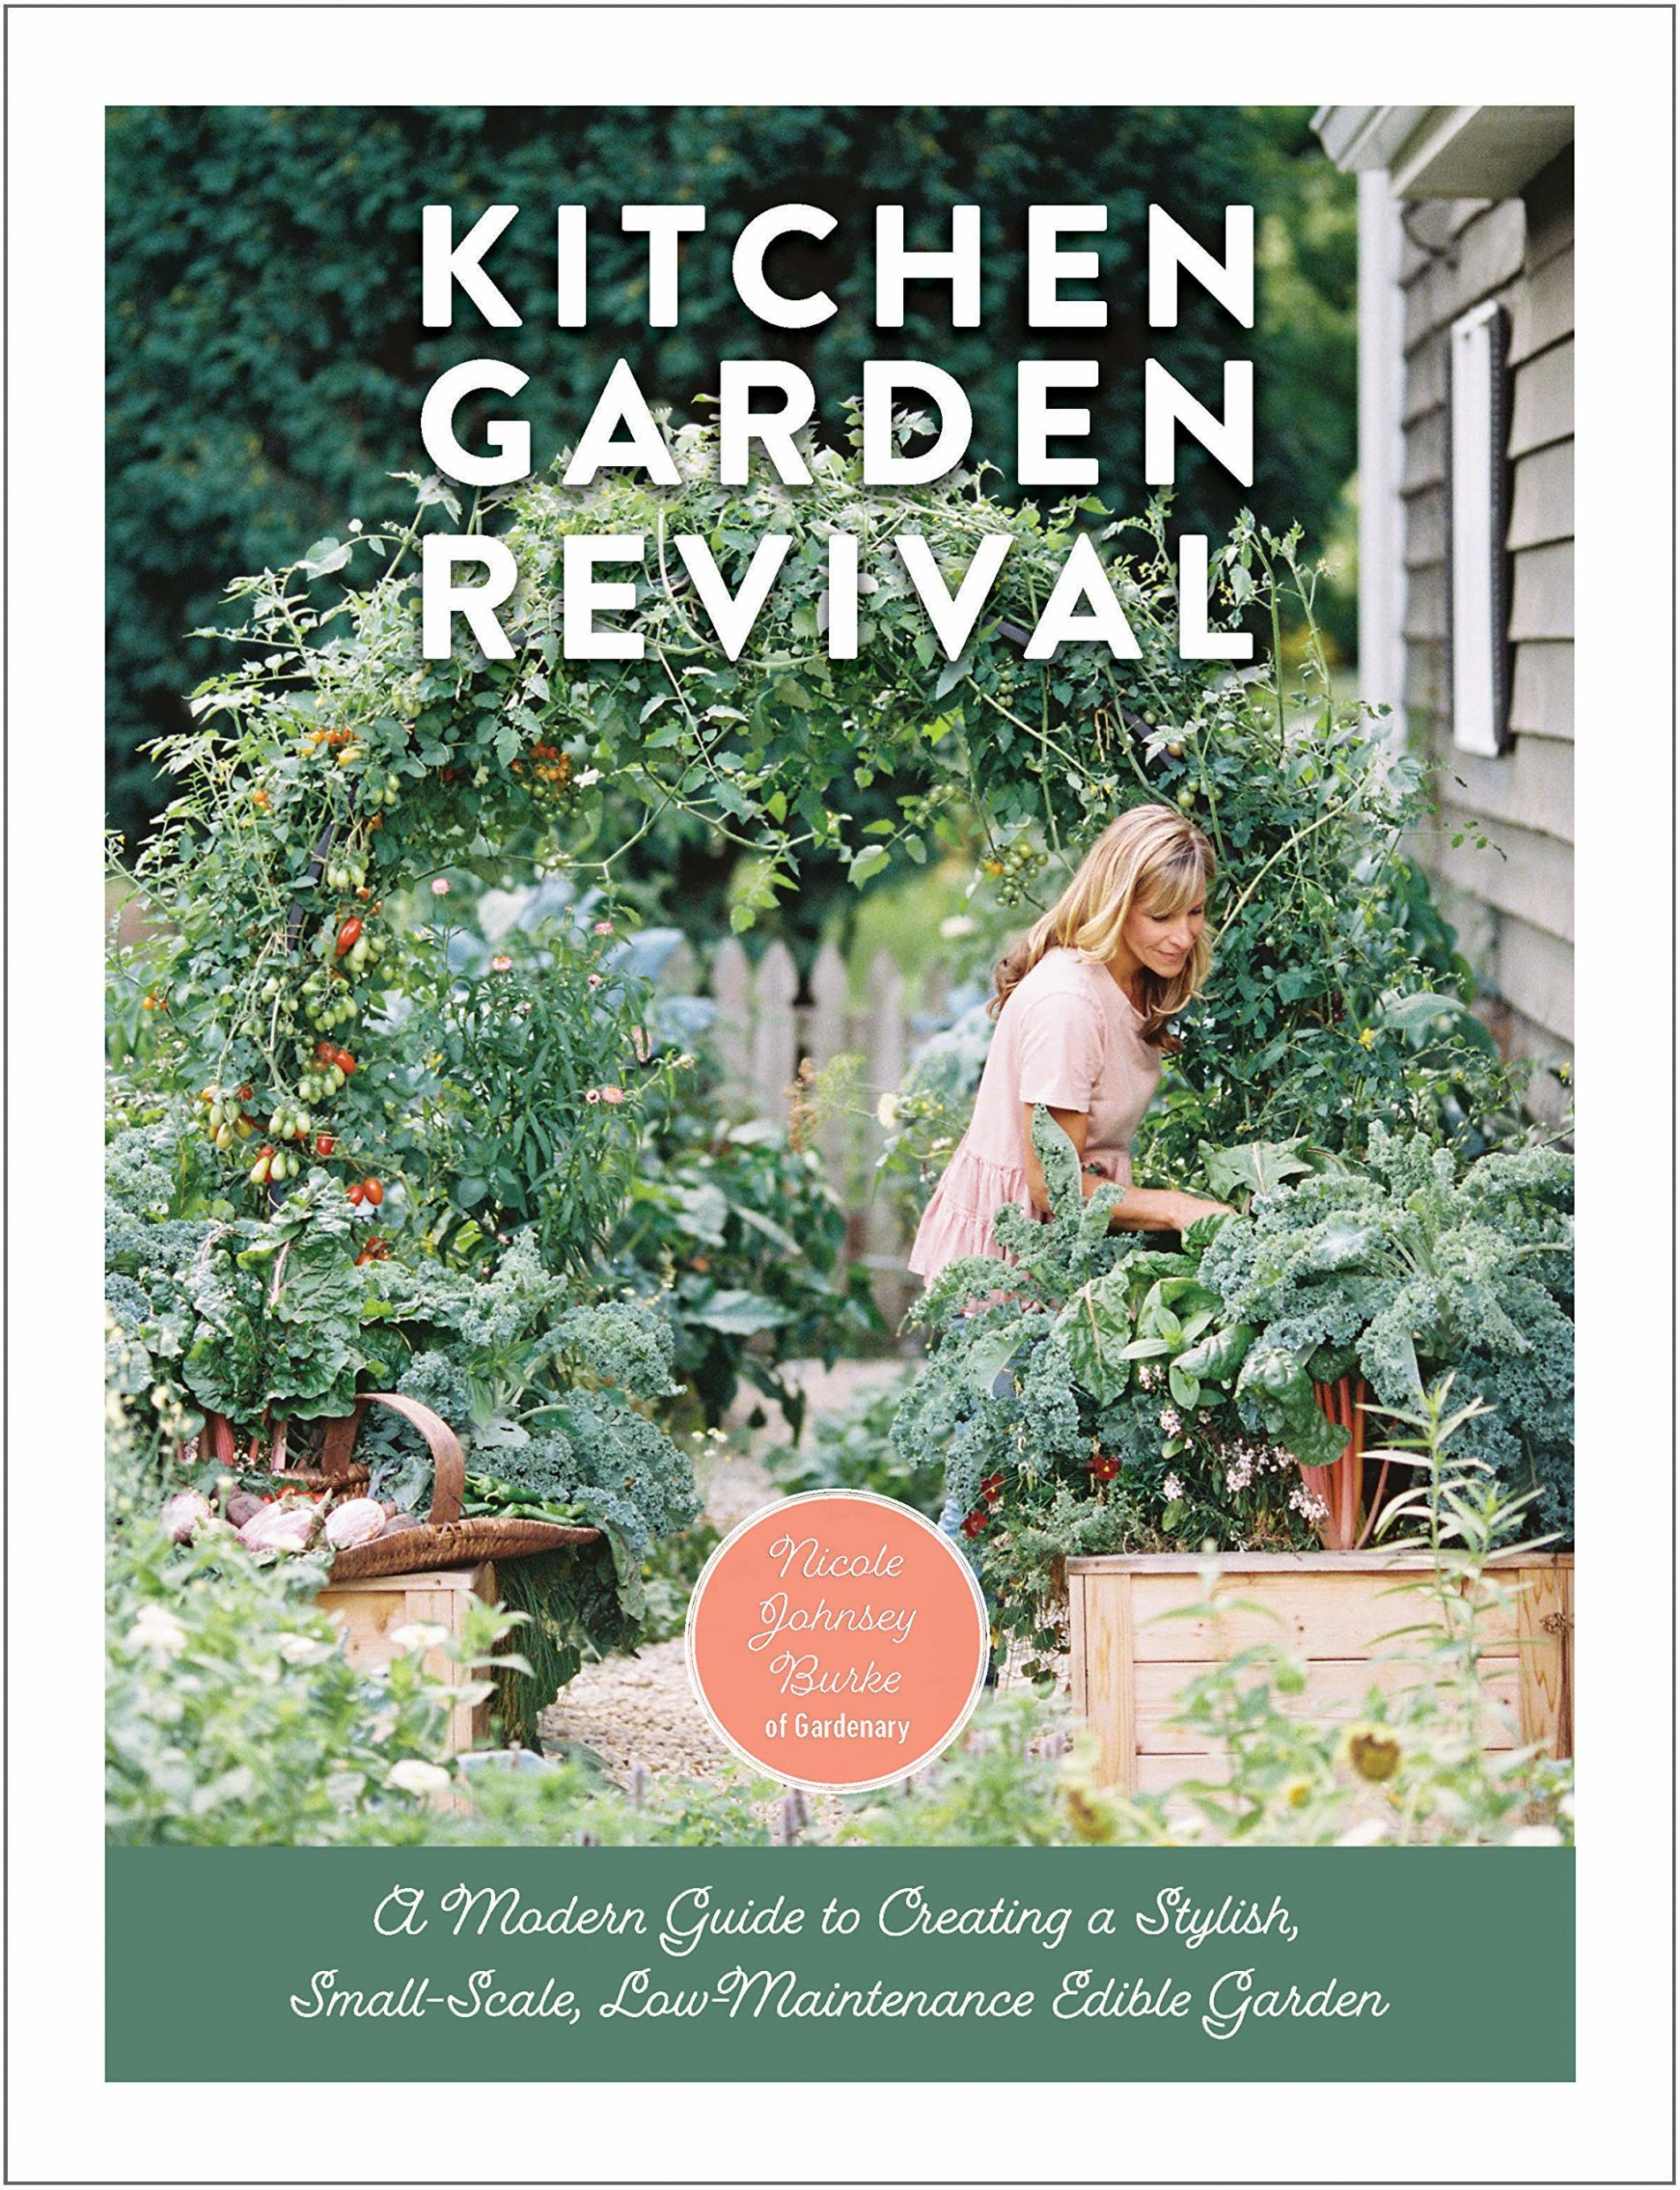 Kitchen Garden Revival: A modern guide to creating a stylish small-scale, low-maintenance edible garden